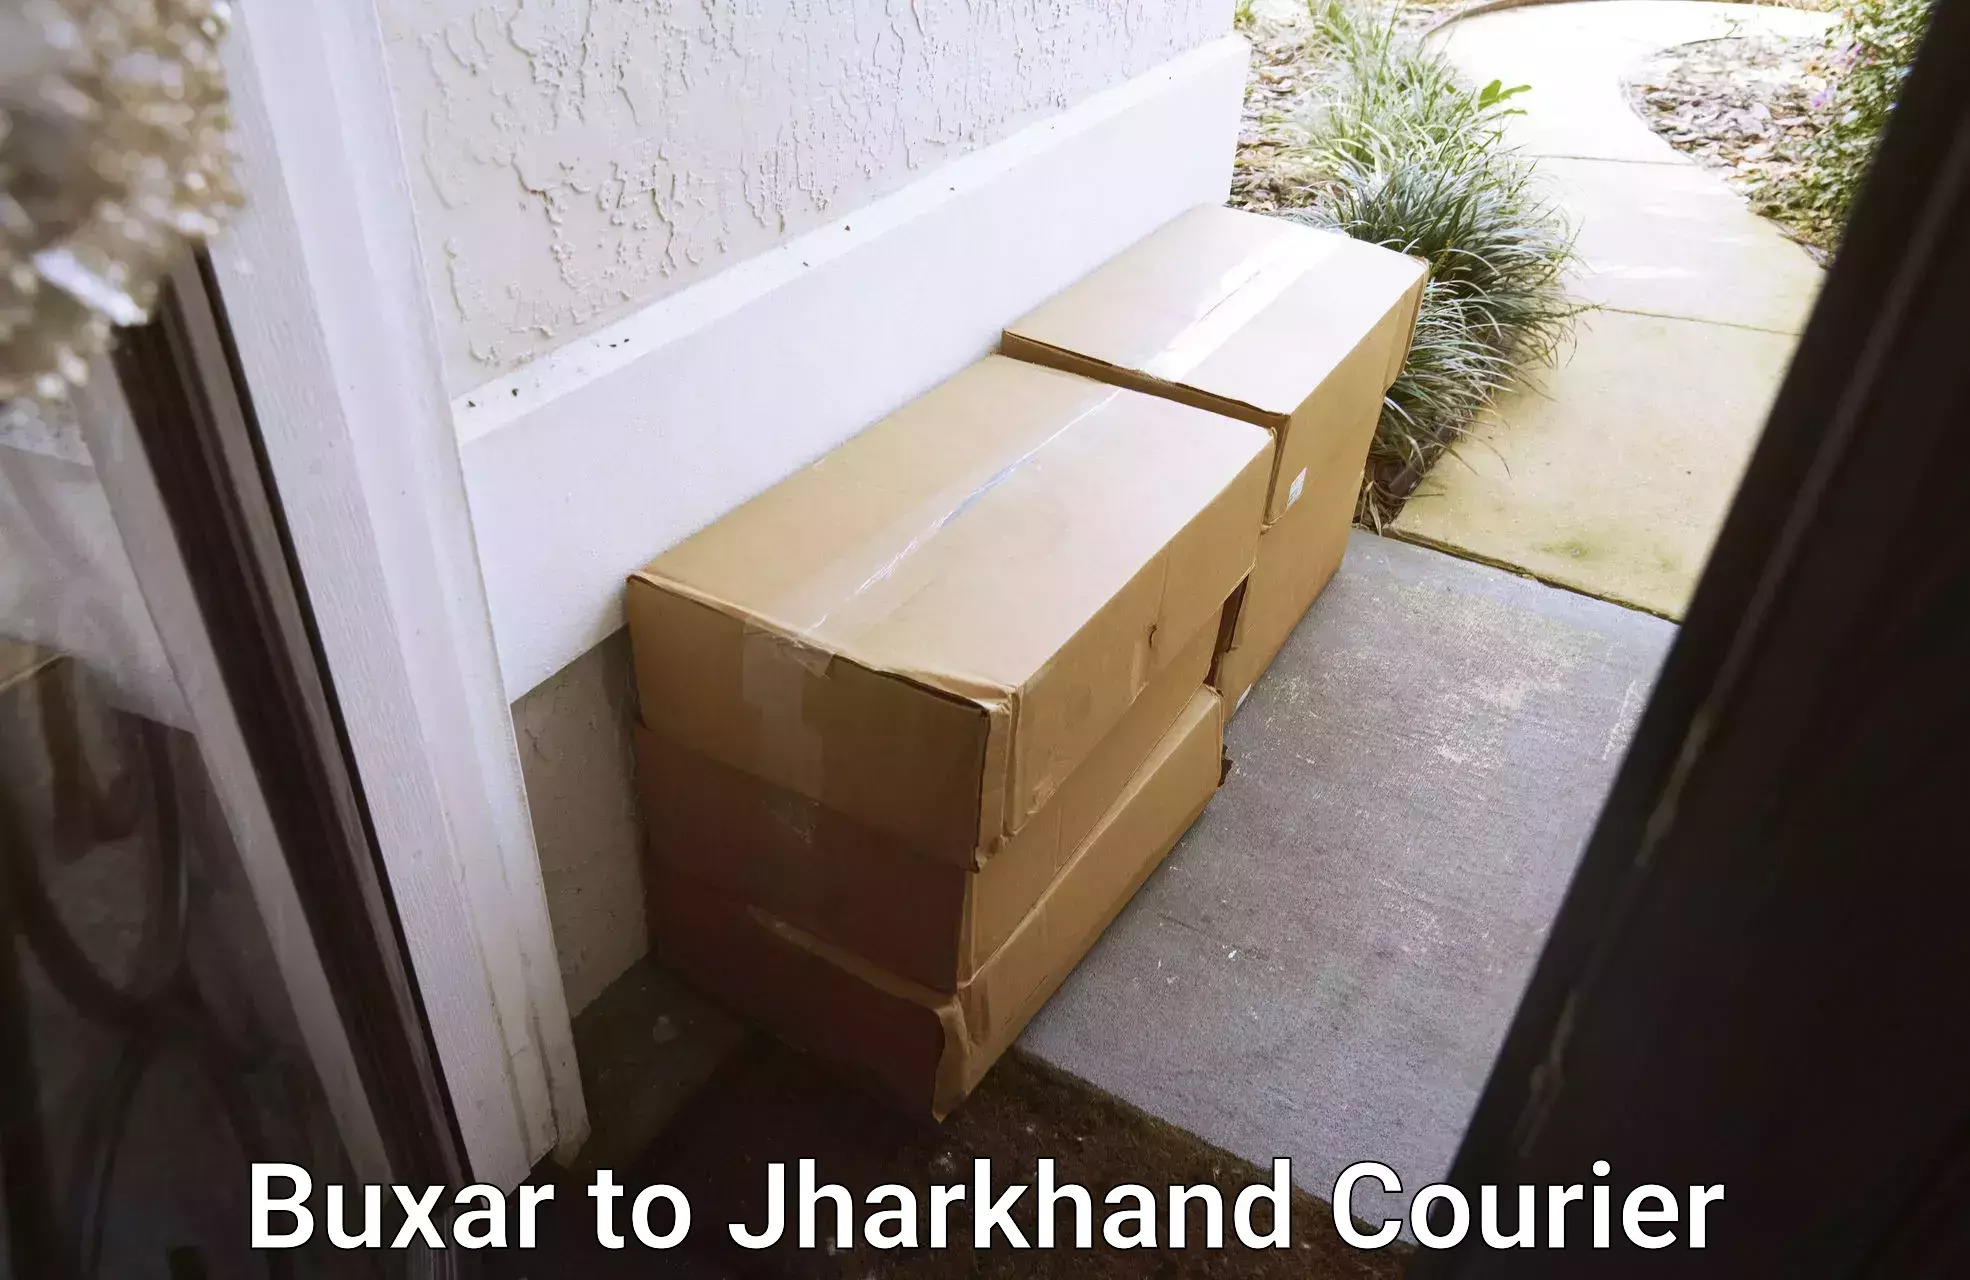 Professional moving company Buxar to Jharkhand